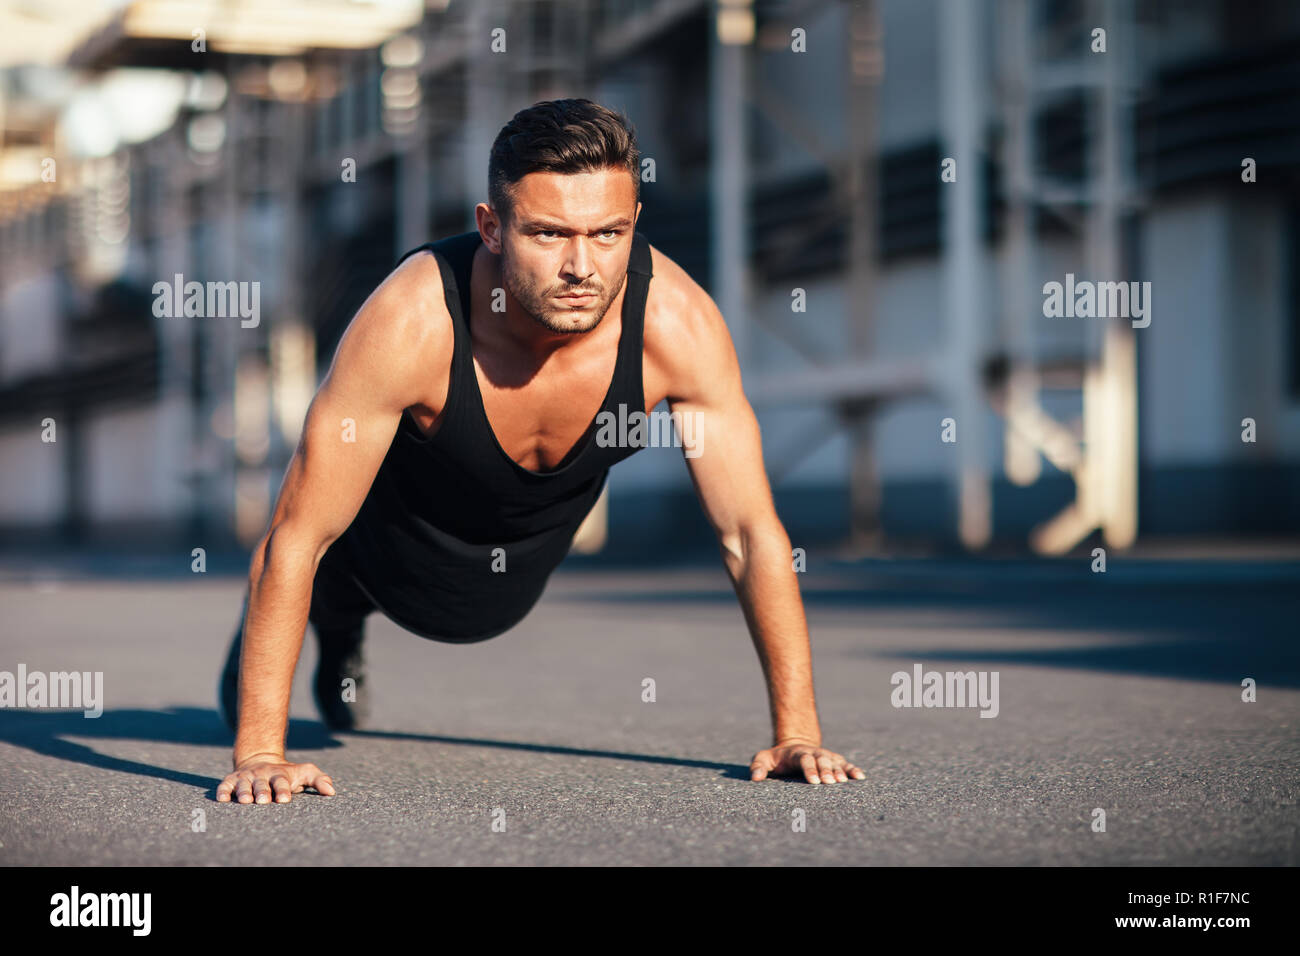 Young serious man doing pushups outdoor on industrial background. concentrated sportsman doing exercise outdoor Stock Photo